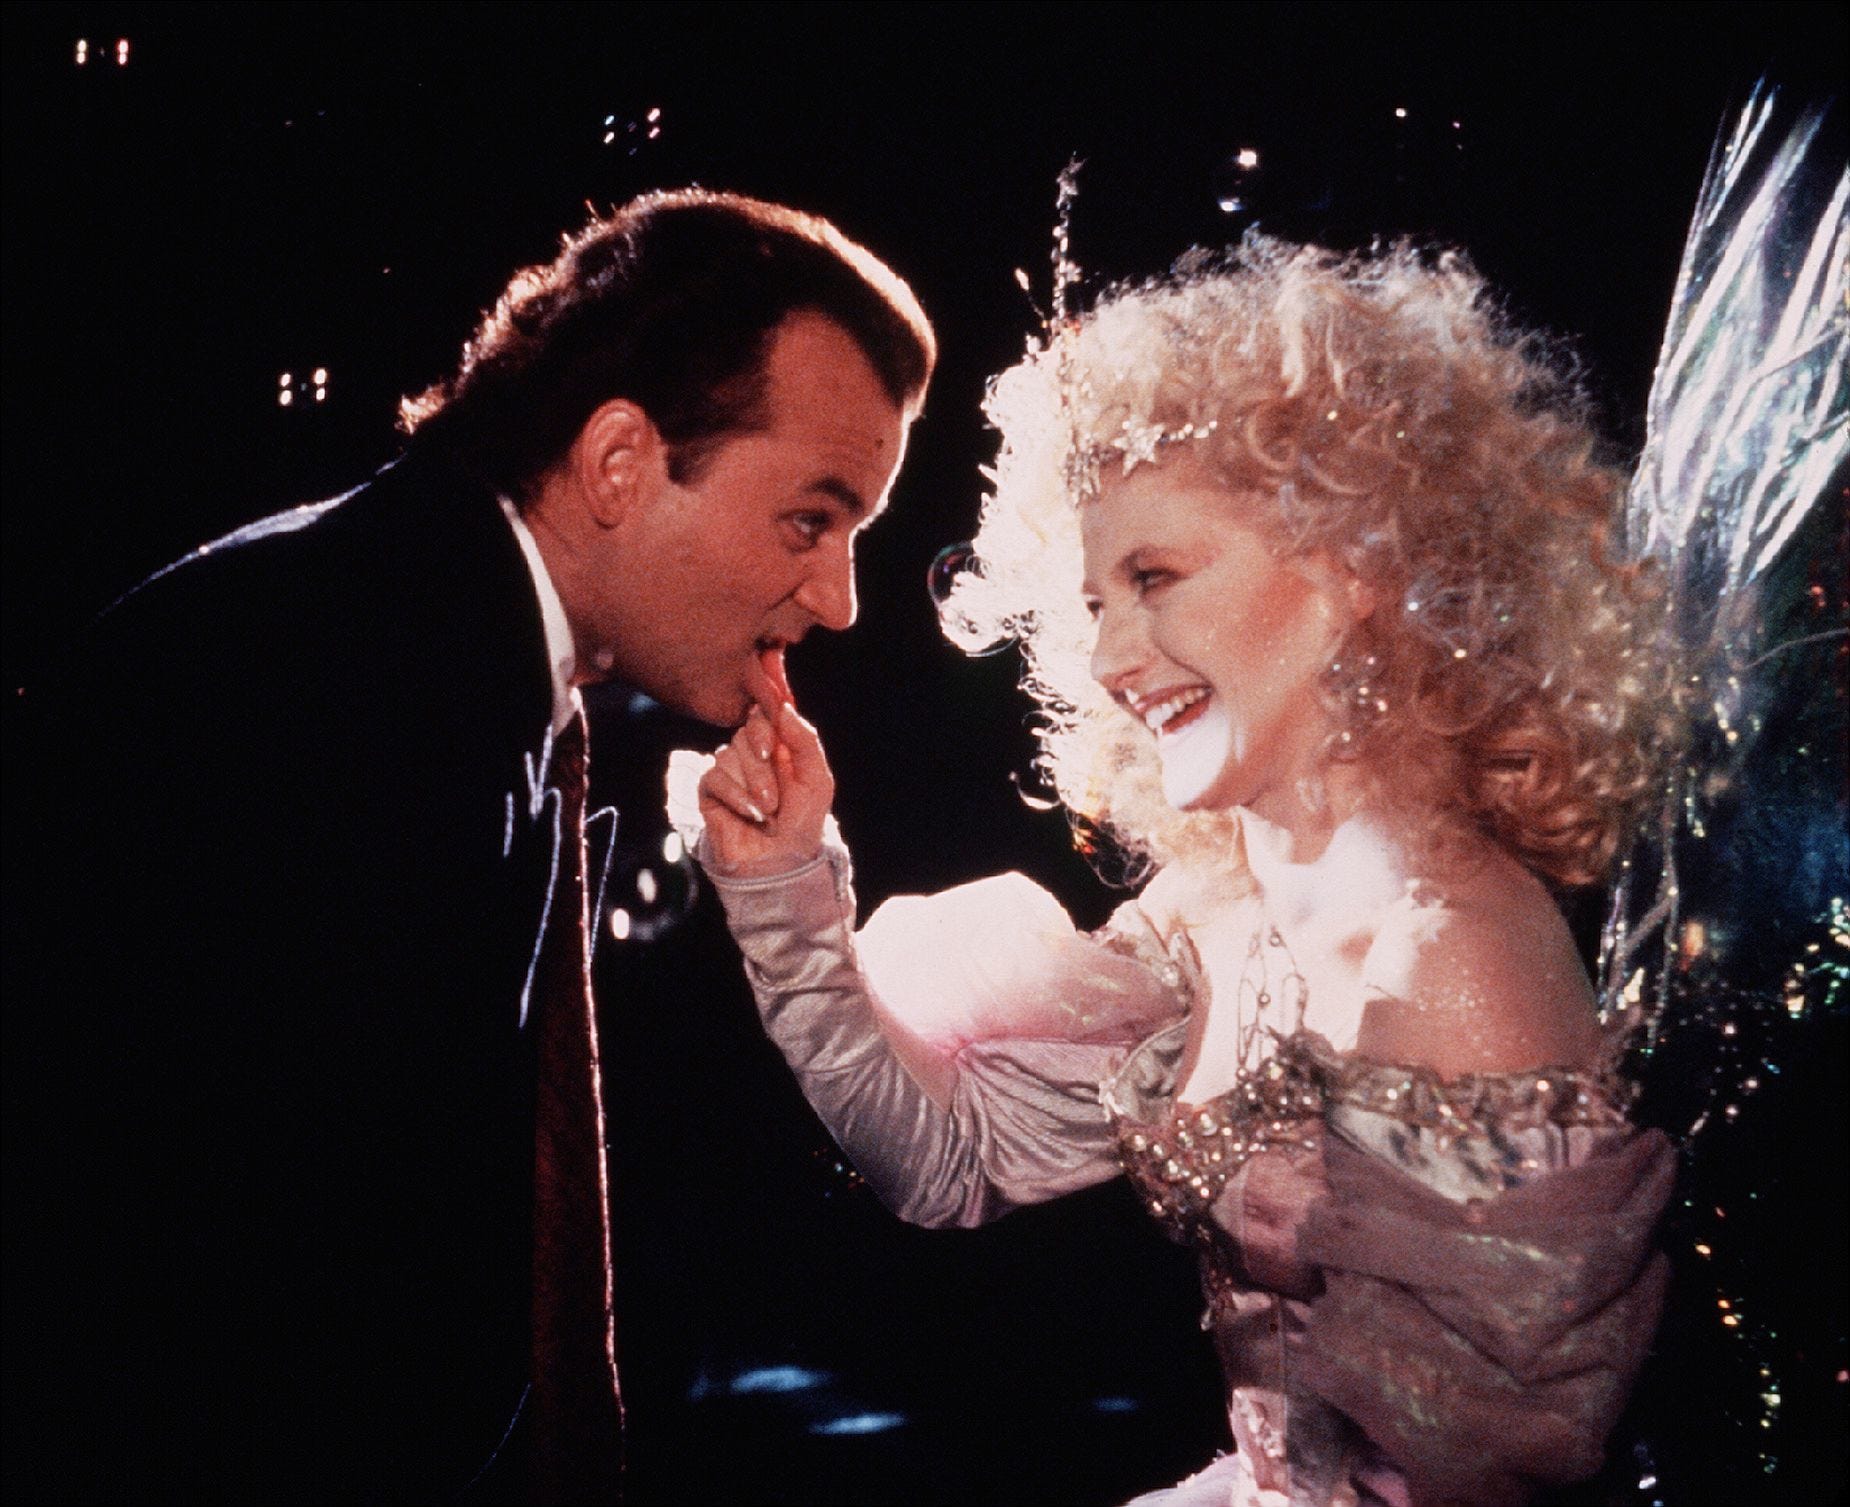 Humbug-y TV executive Frank Cross (Bill Murray) encounters a playfully vicious Ghost of Christmas Past (Carol Kane) in "Scrooged."